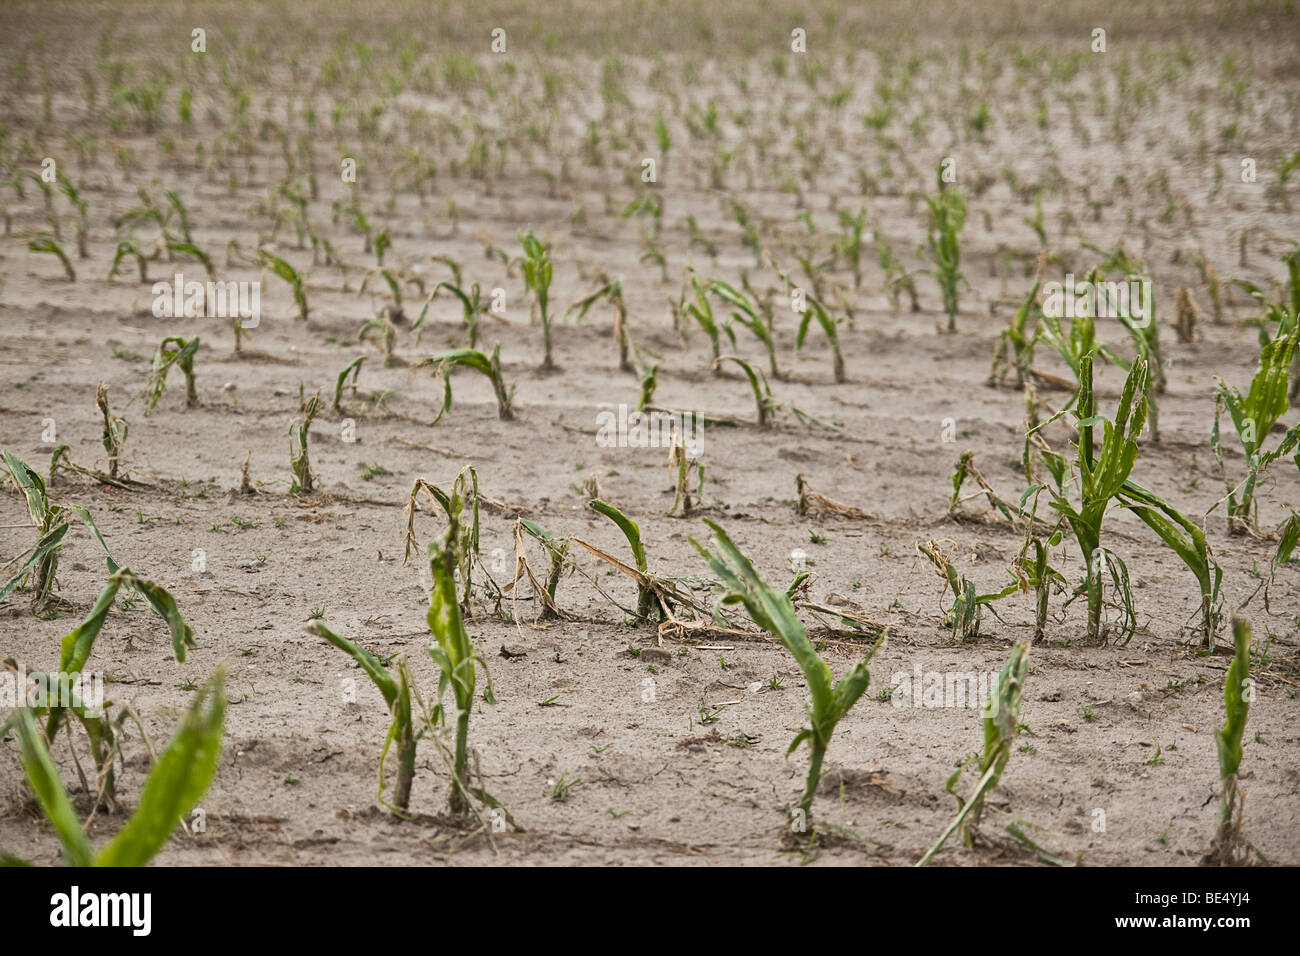 Young Maize (Zea mays) plants on a field with hail damage after a heavy storm, Bermatingen, Baden-Wuerttemberg, Germany, Europe Stock Photo